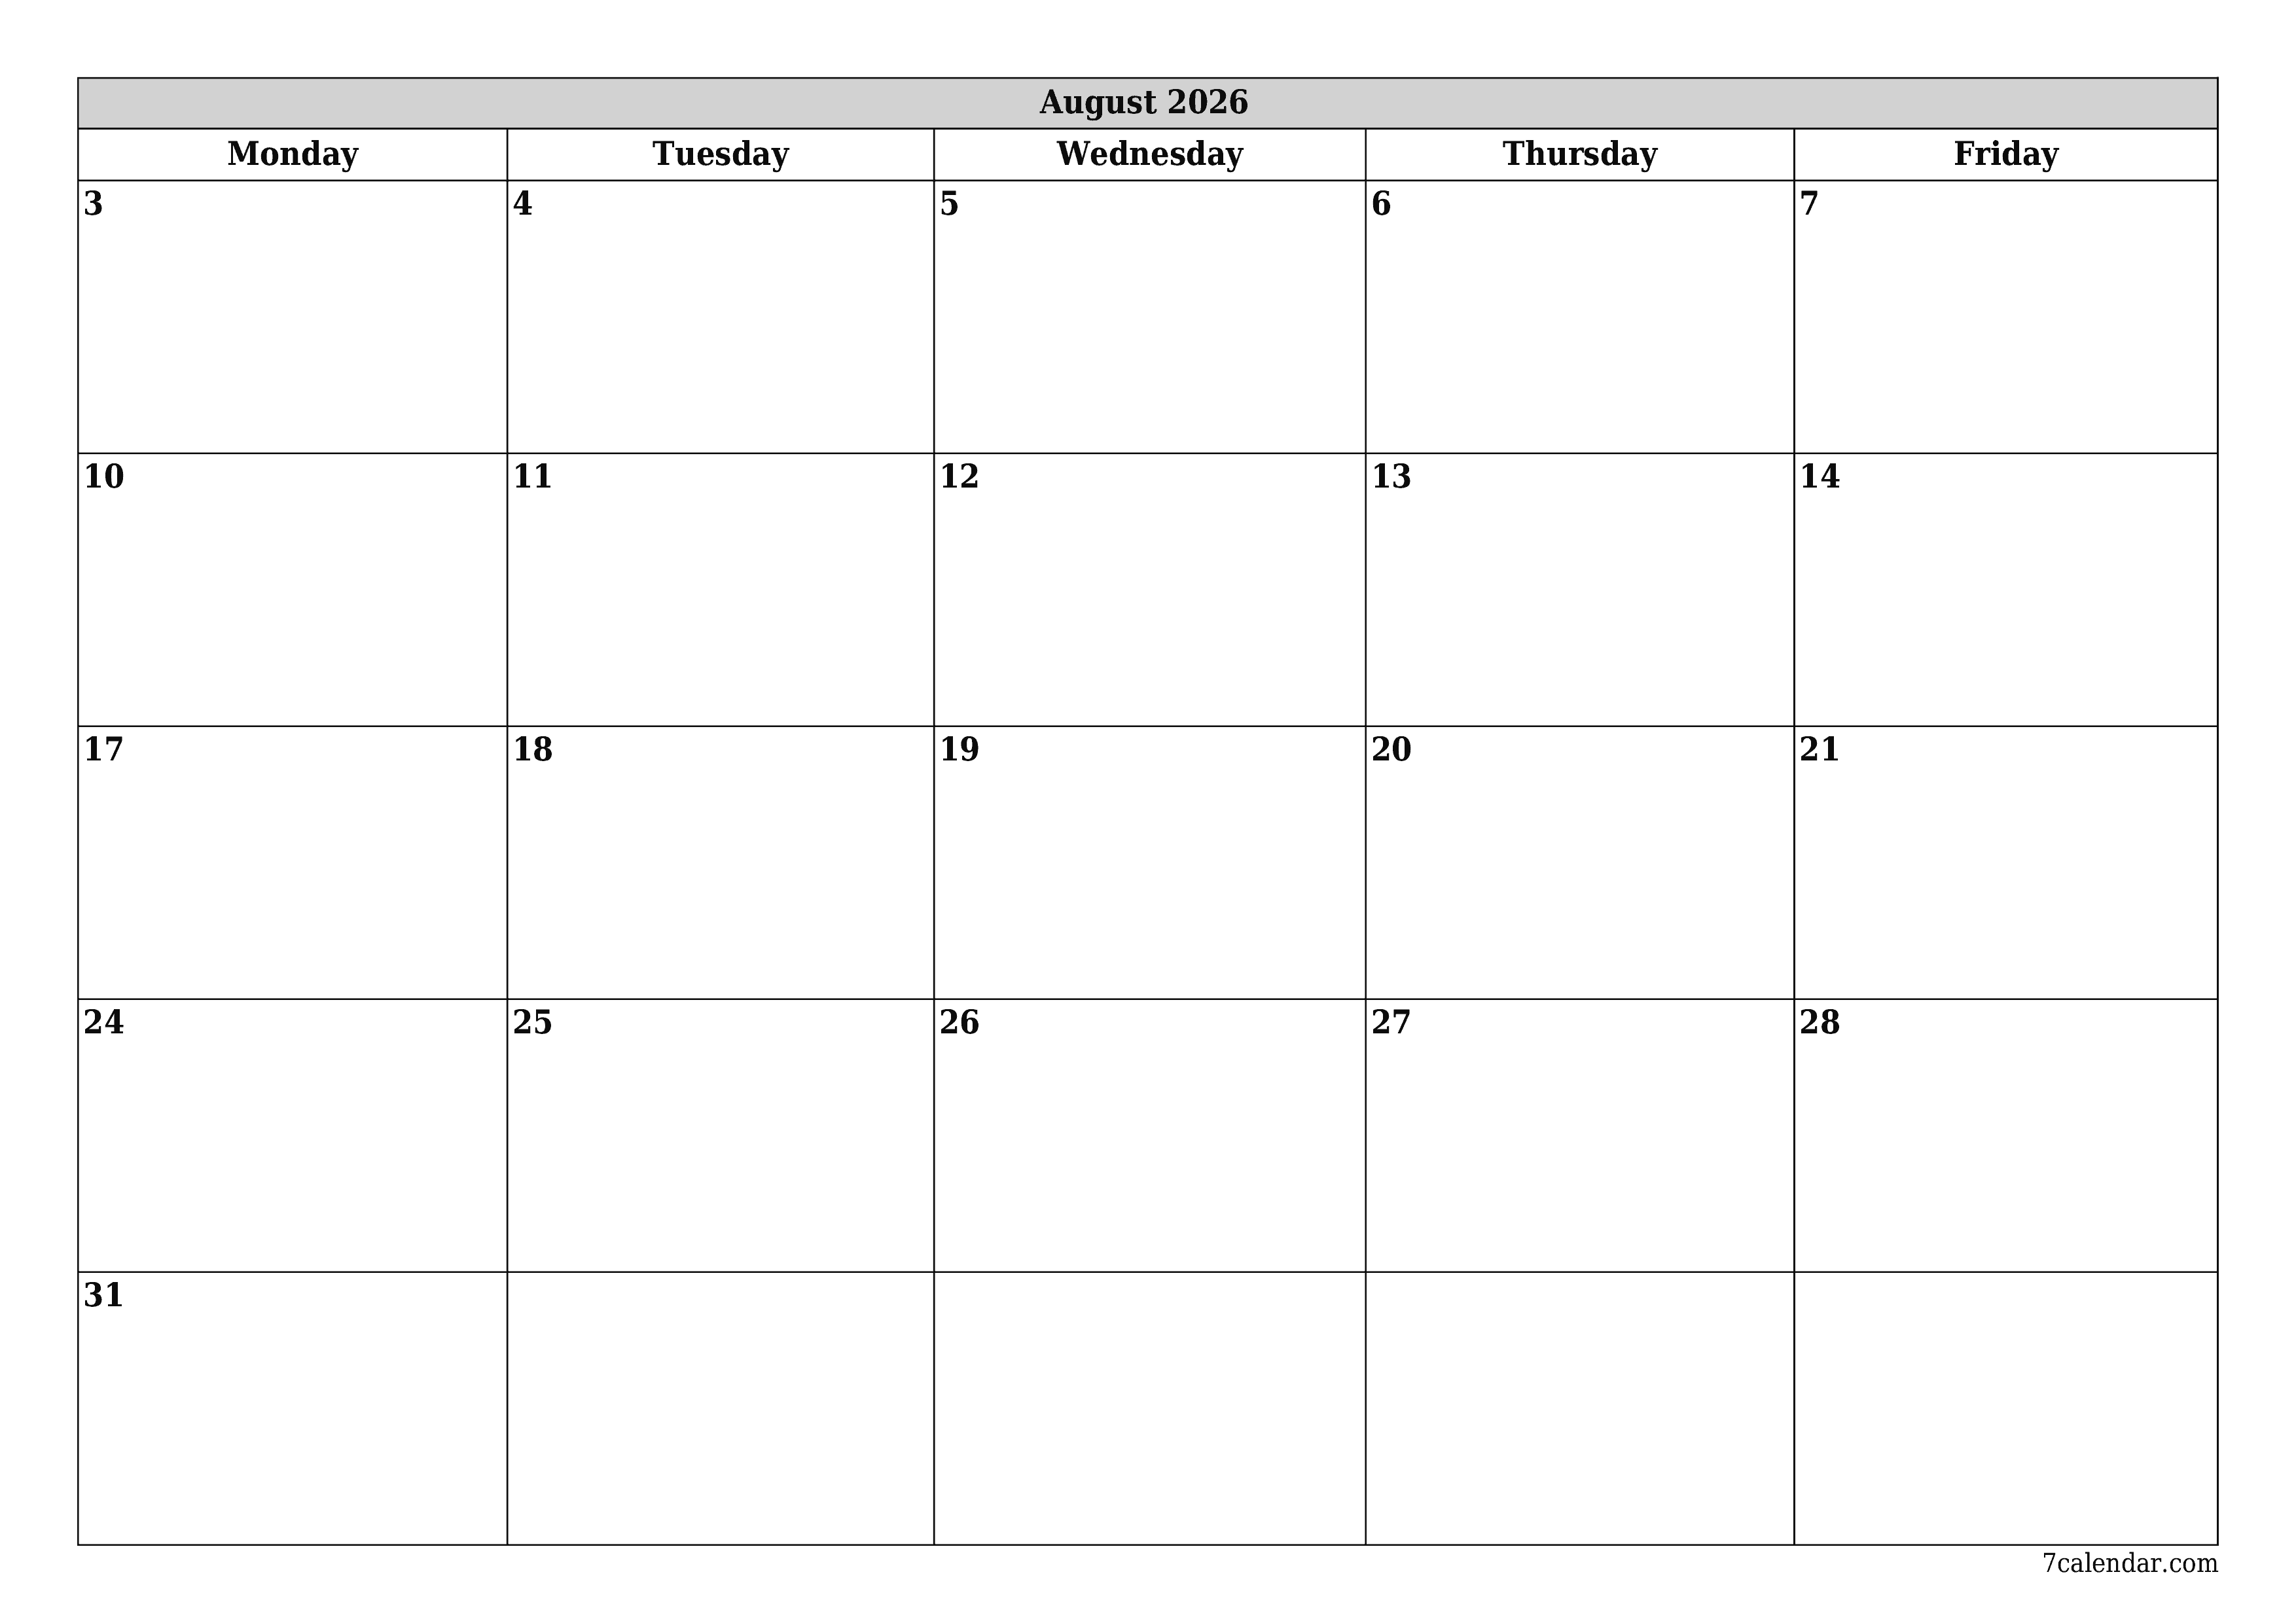 printable wall template free horizontal Monthly planner calendar August (Aug) 2026